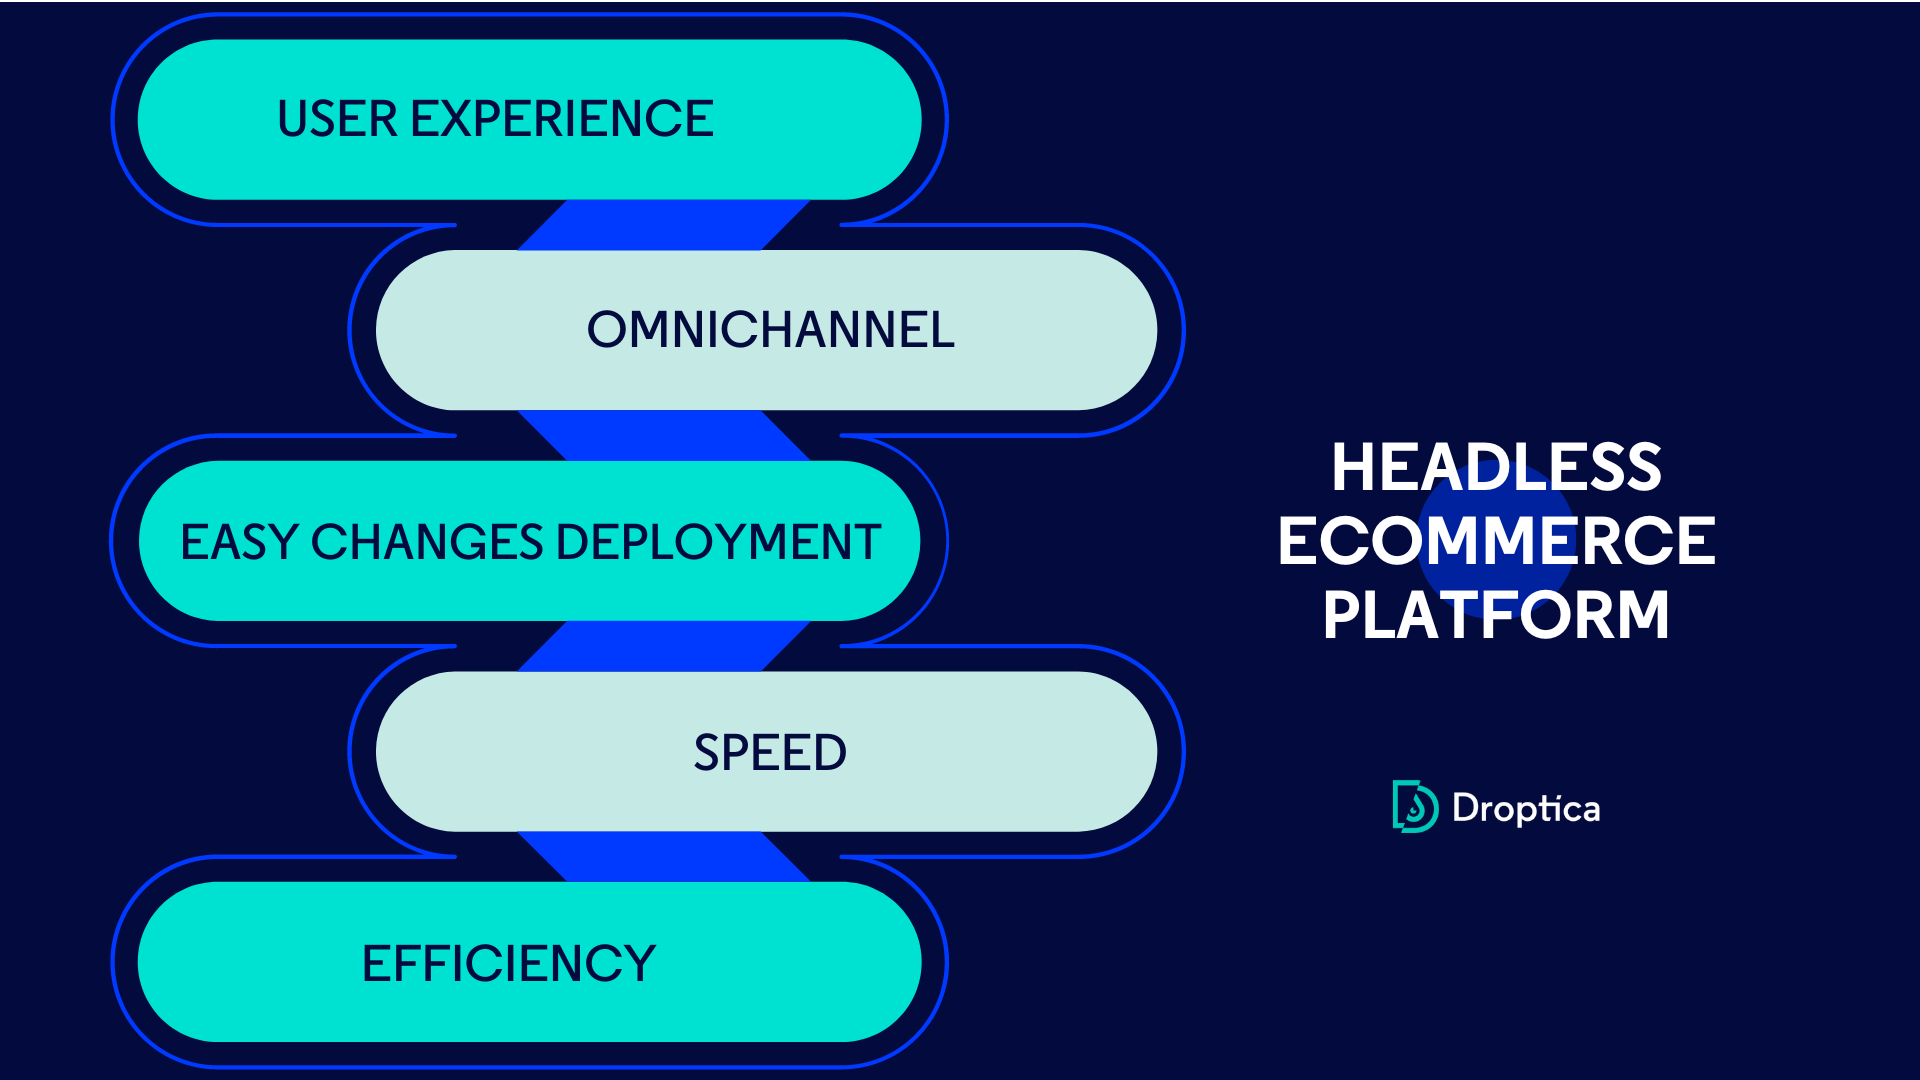 Headless ecommerce platform is fast, efficient, and facilitates implementing omnichannel activities.